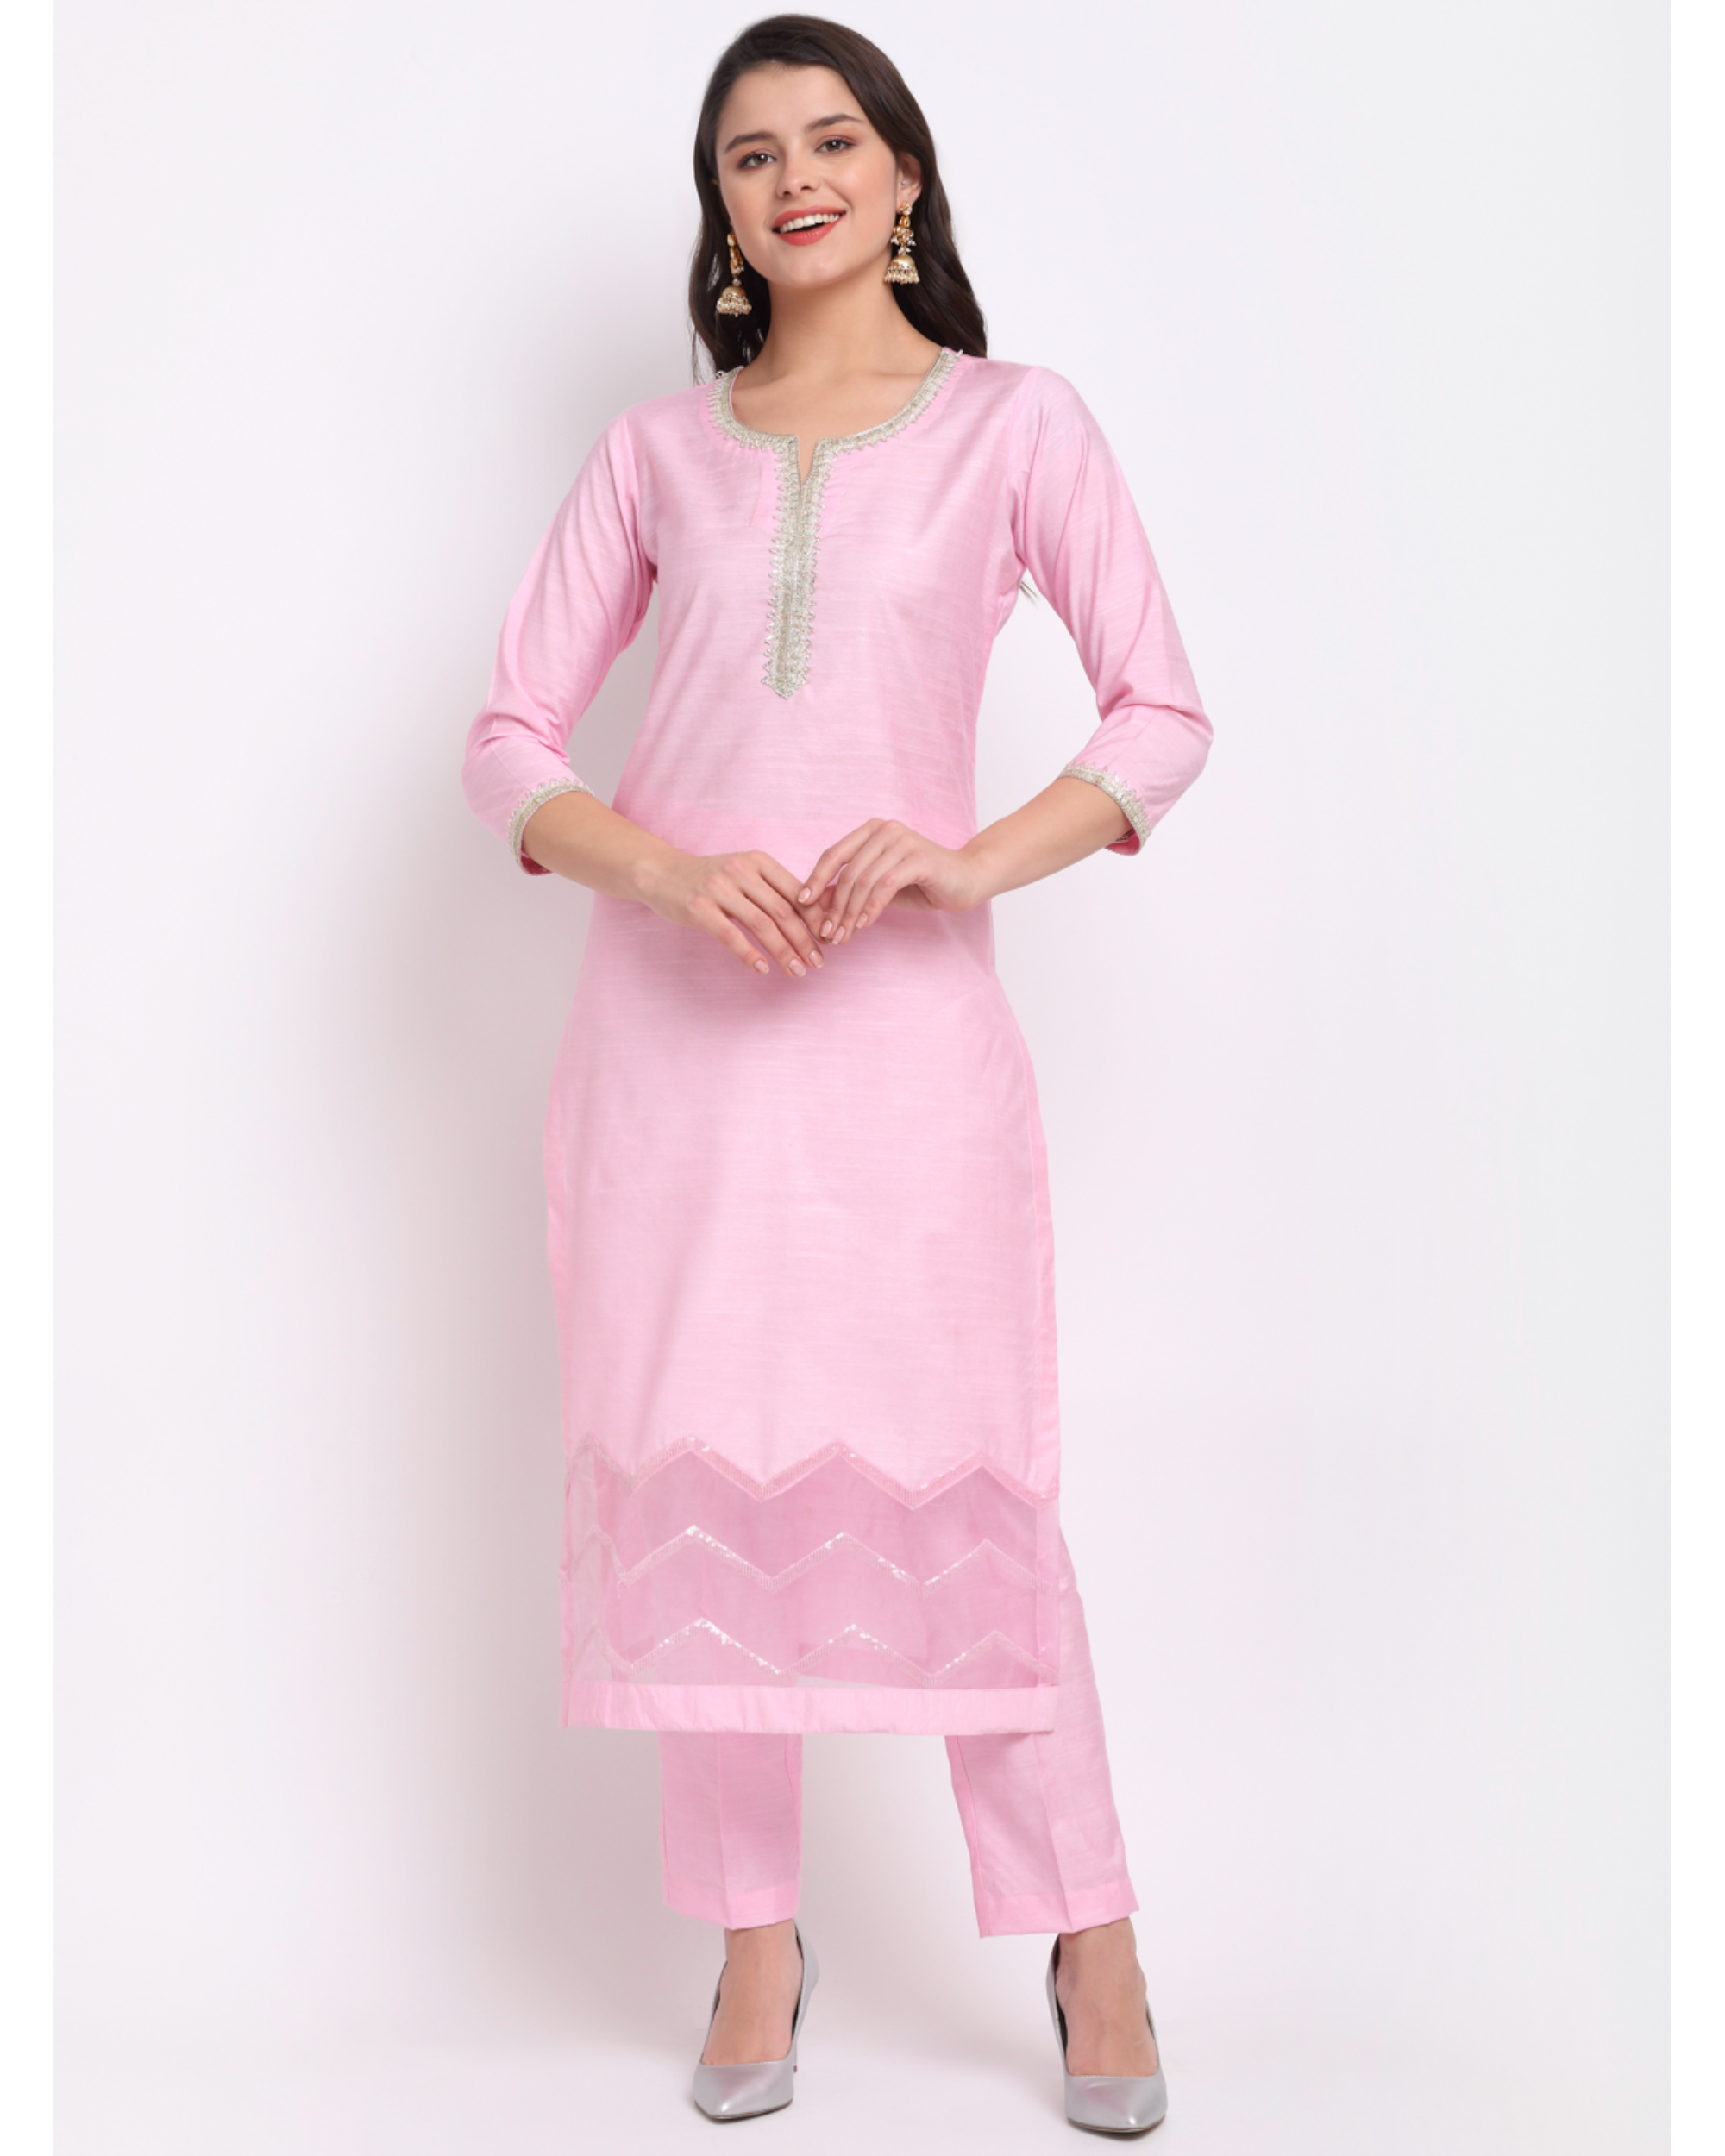 White Cotton Kurta Set for Women with printed dupatta and a straight pant |  Buy Online